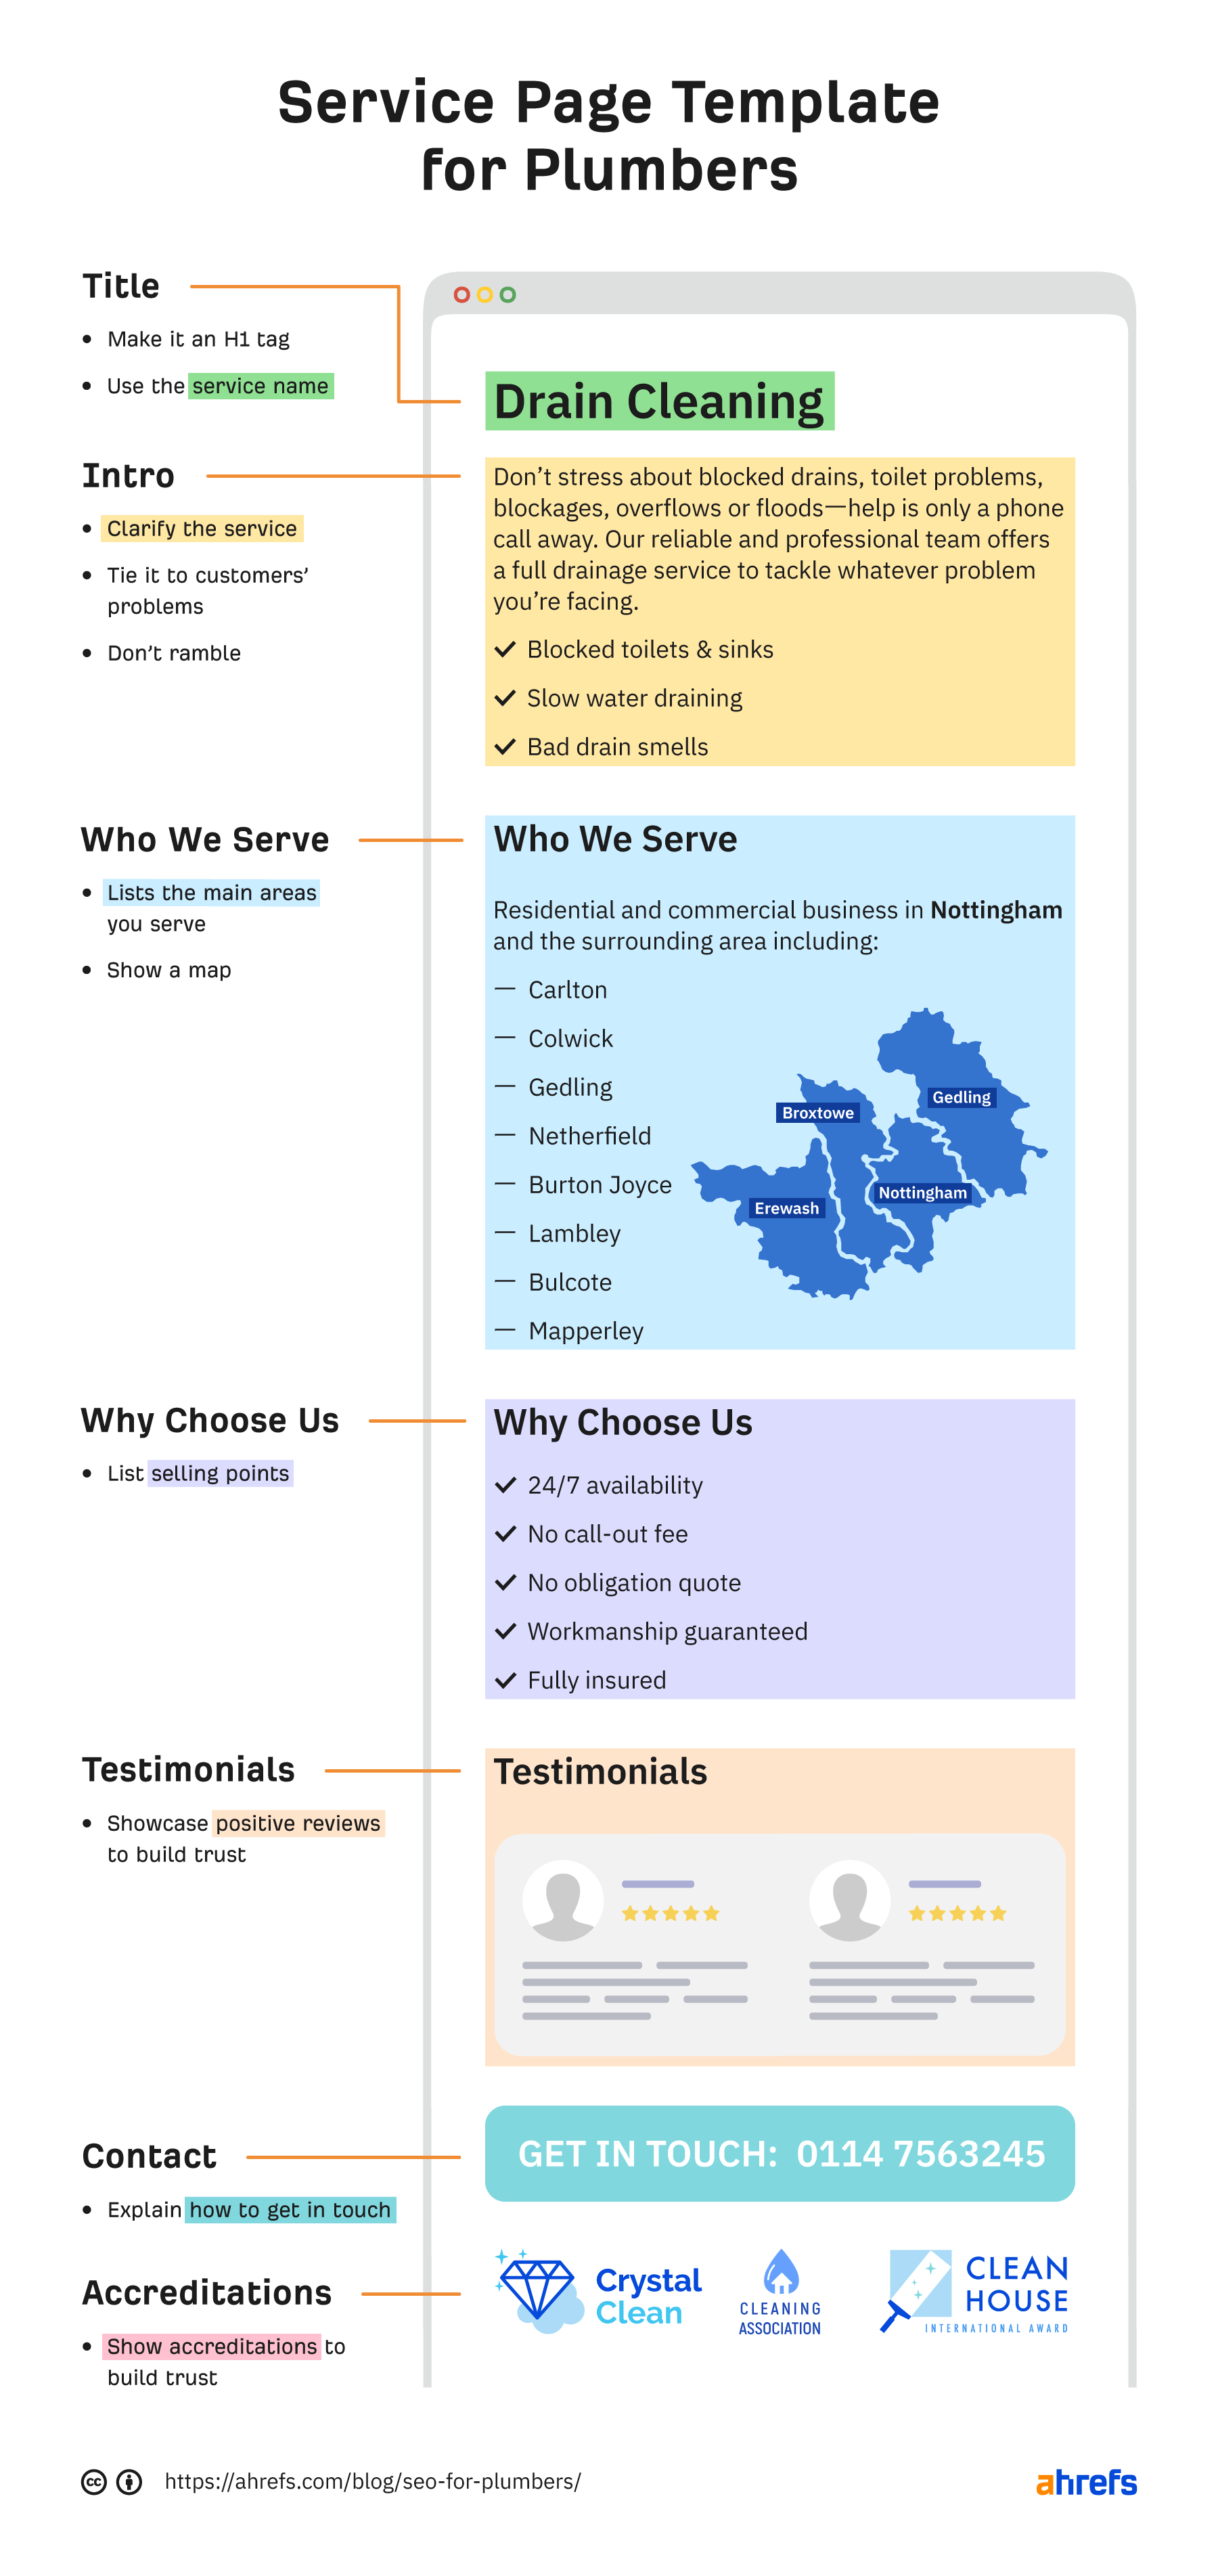 Service page template for plumbers
